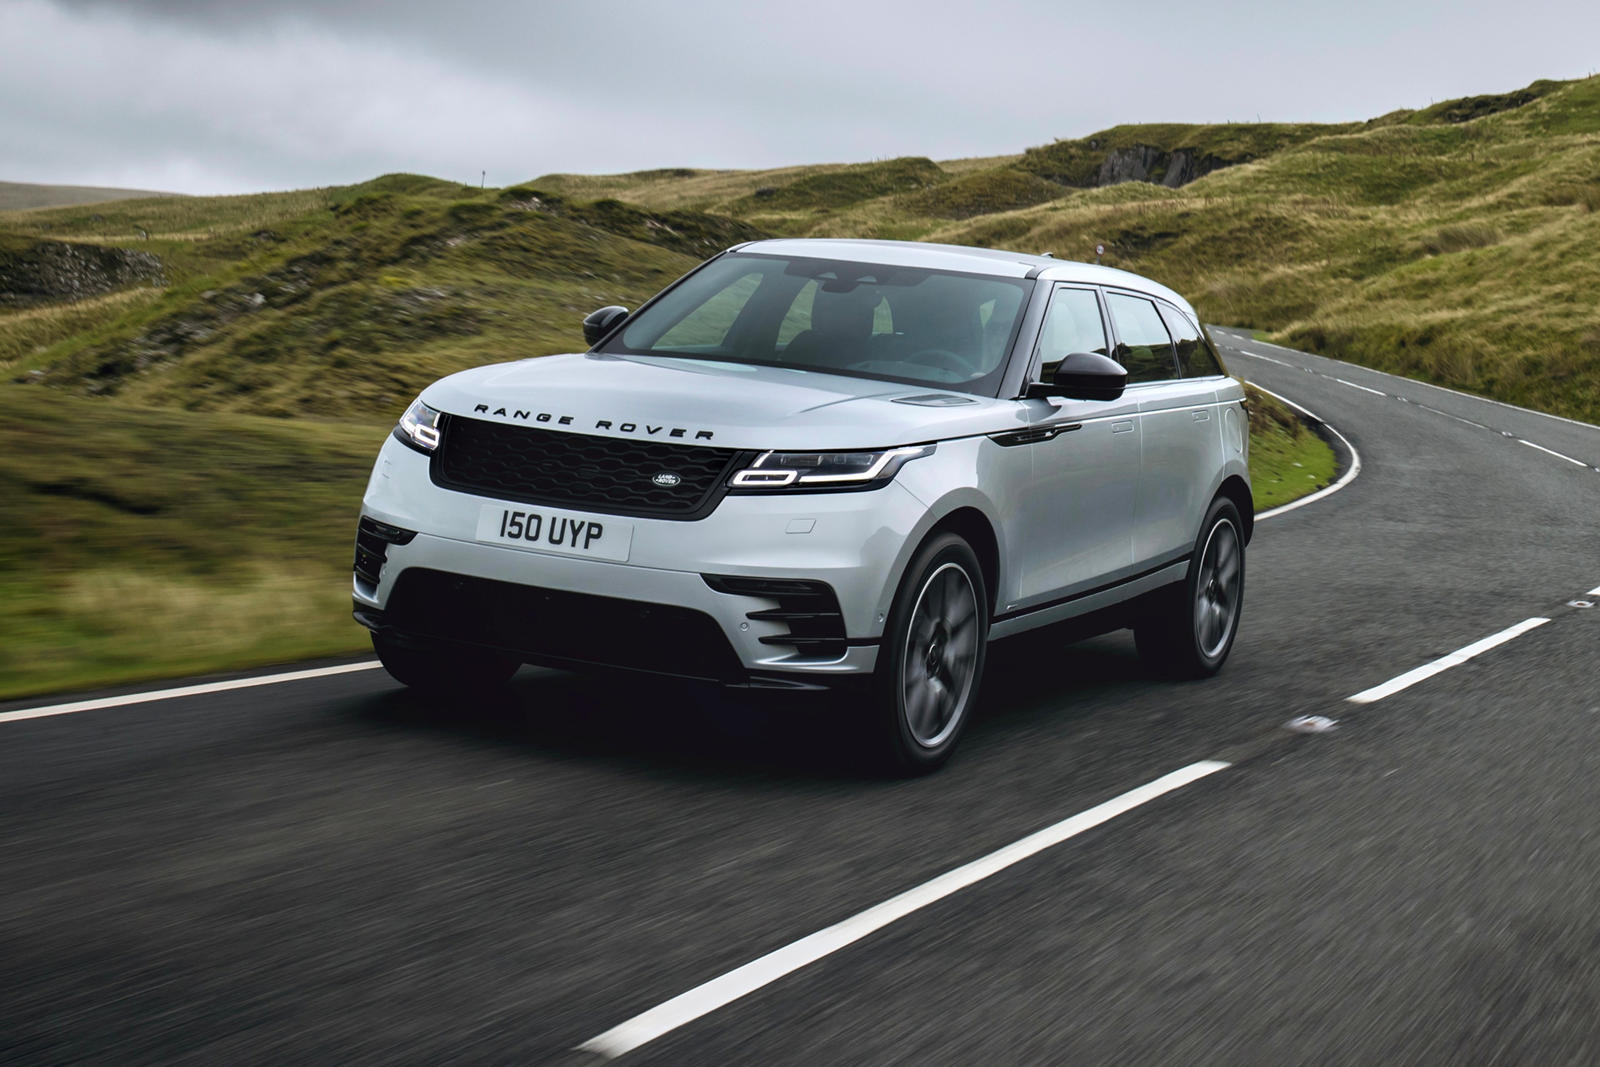 2022 Land Rover Range Rover Velar Front View Driving